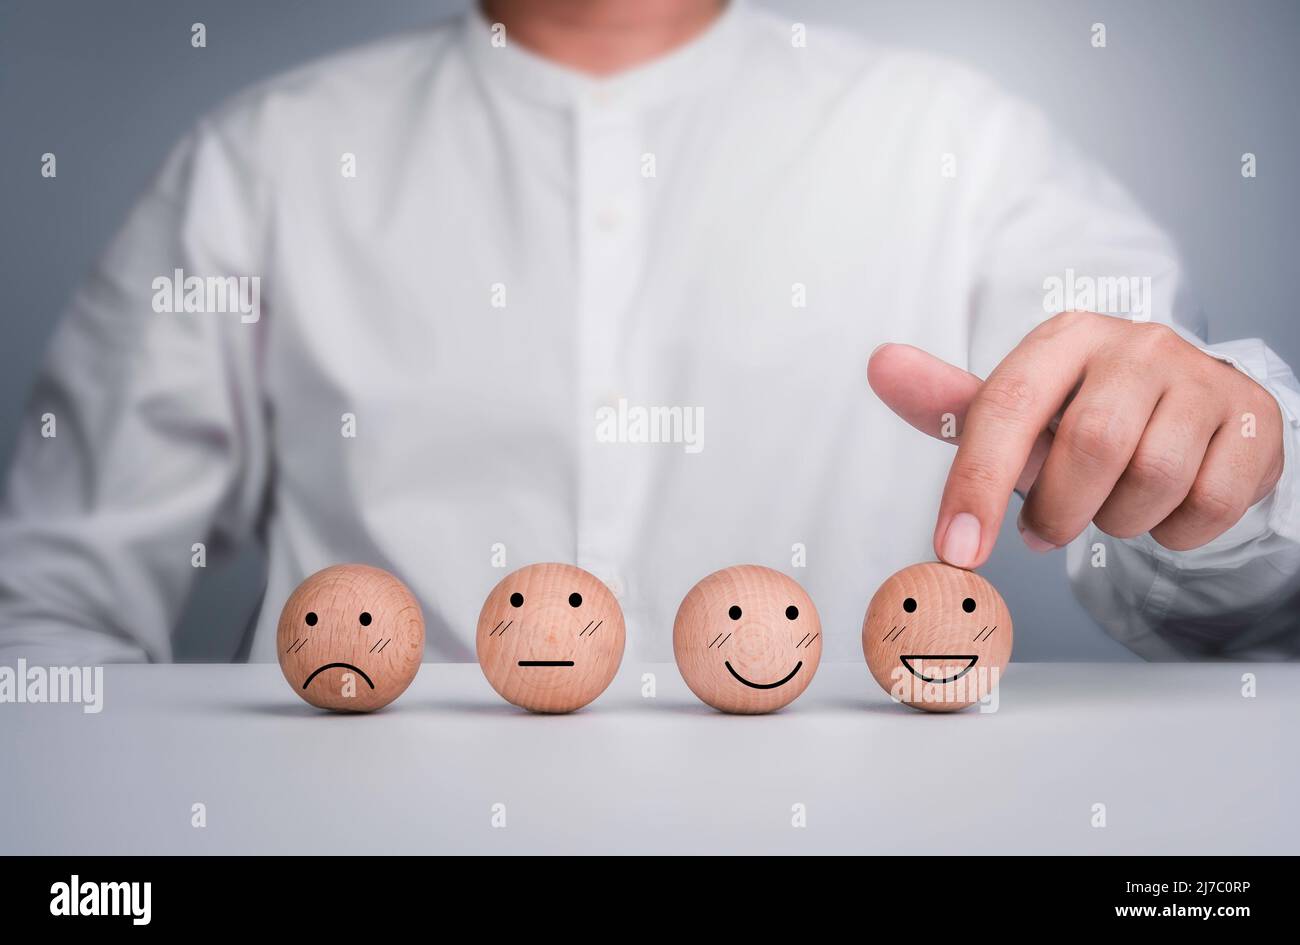 Customer service evaluation, feedback, client experience, and satisfaction survey concepts. Happy face emoticon wooden ball was chosen by the customer Stock Photo